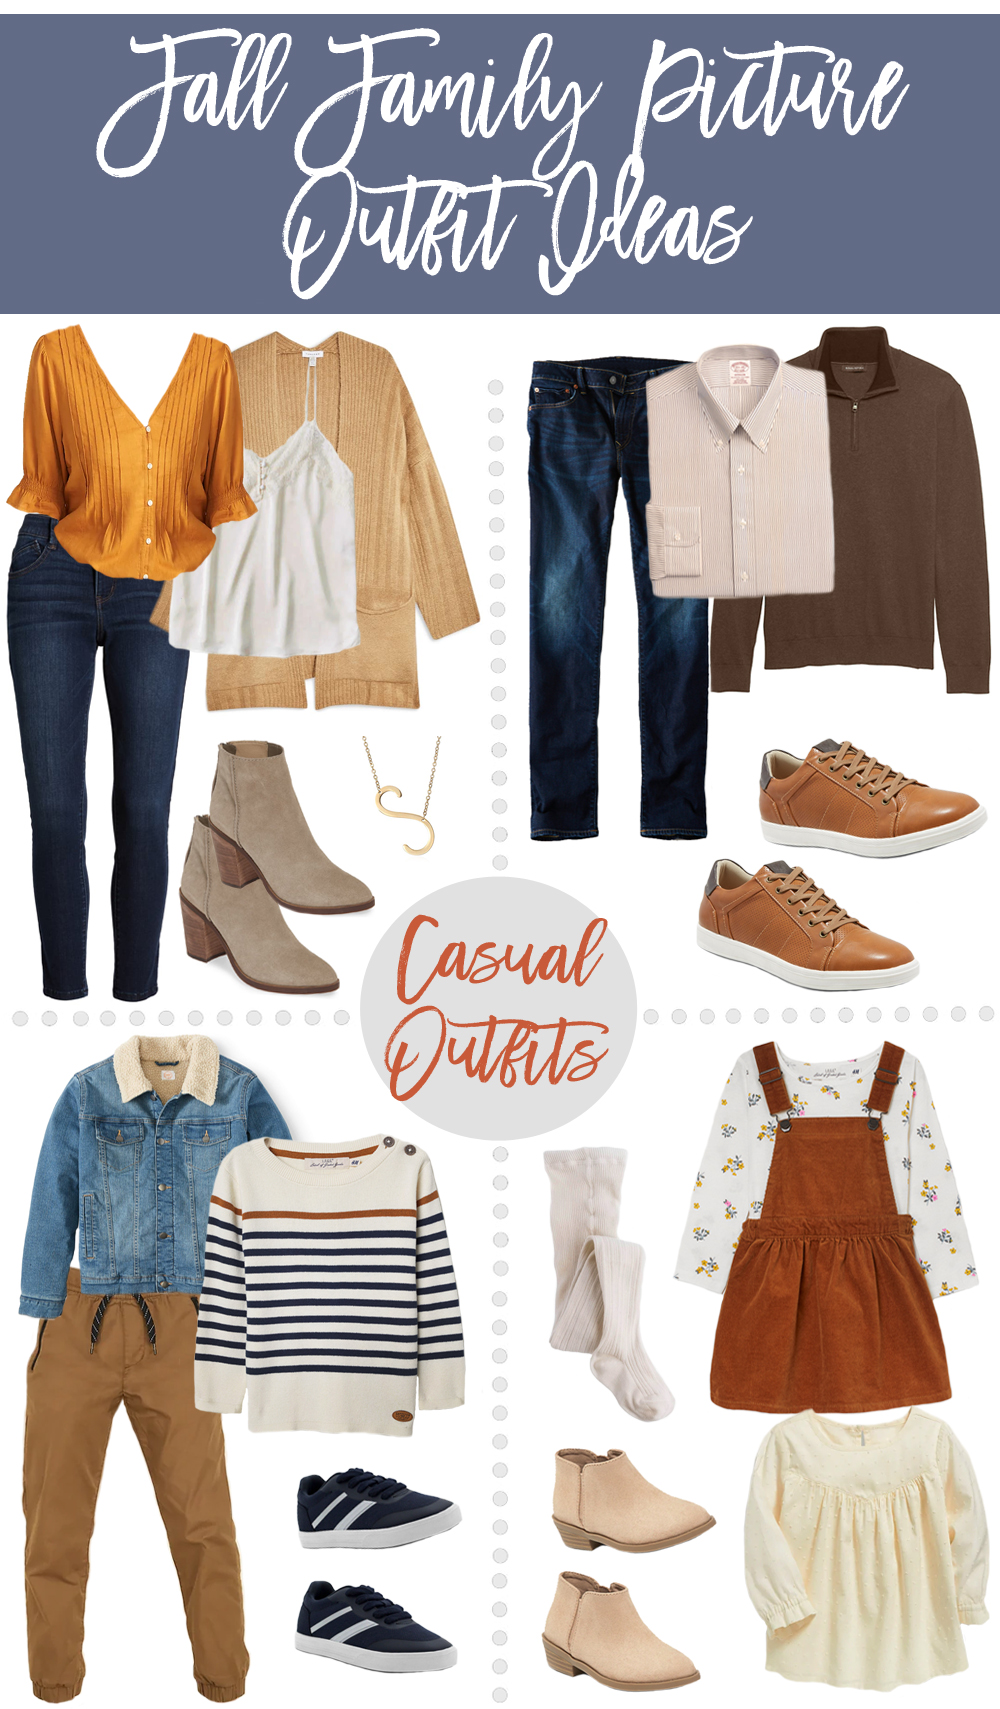 dressy fall outfits